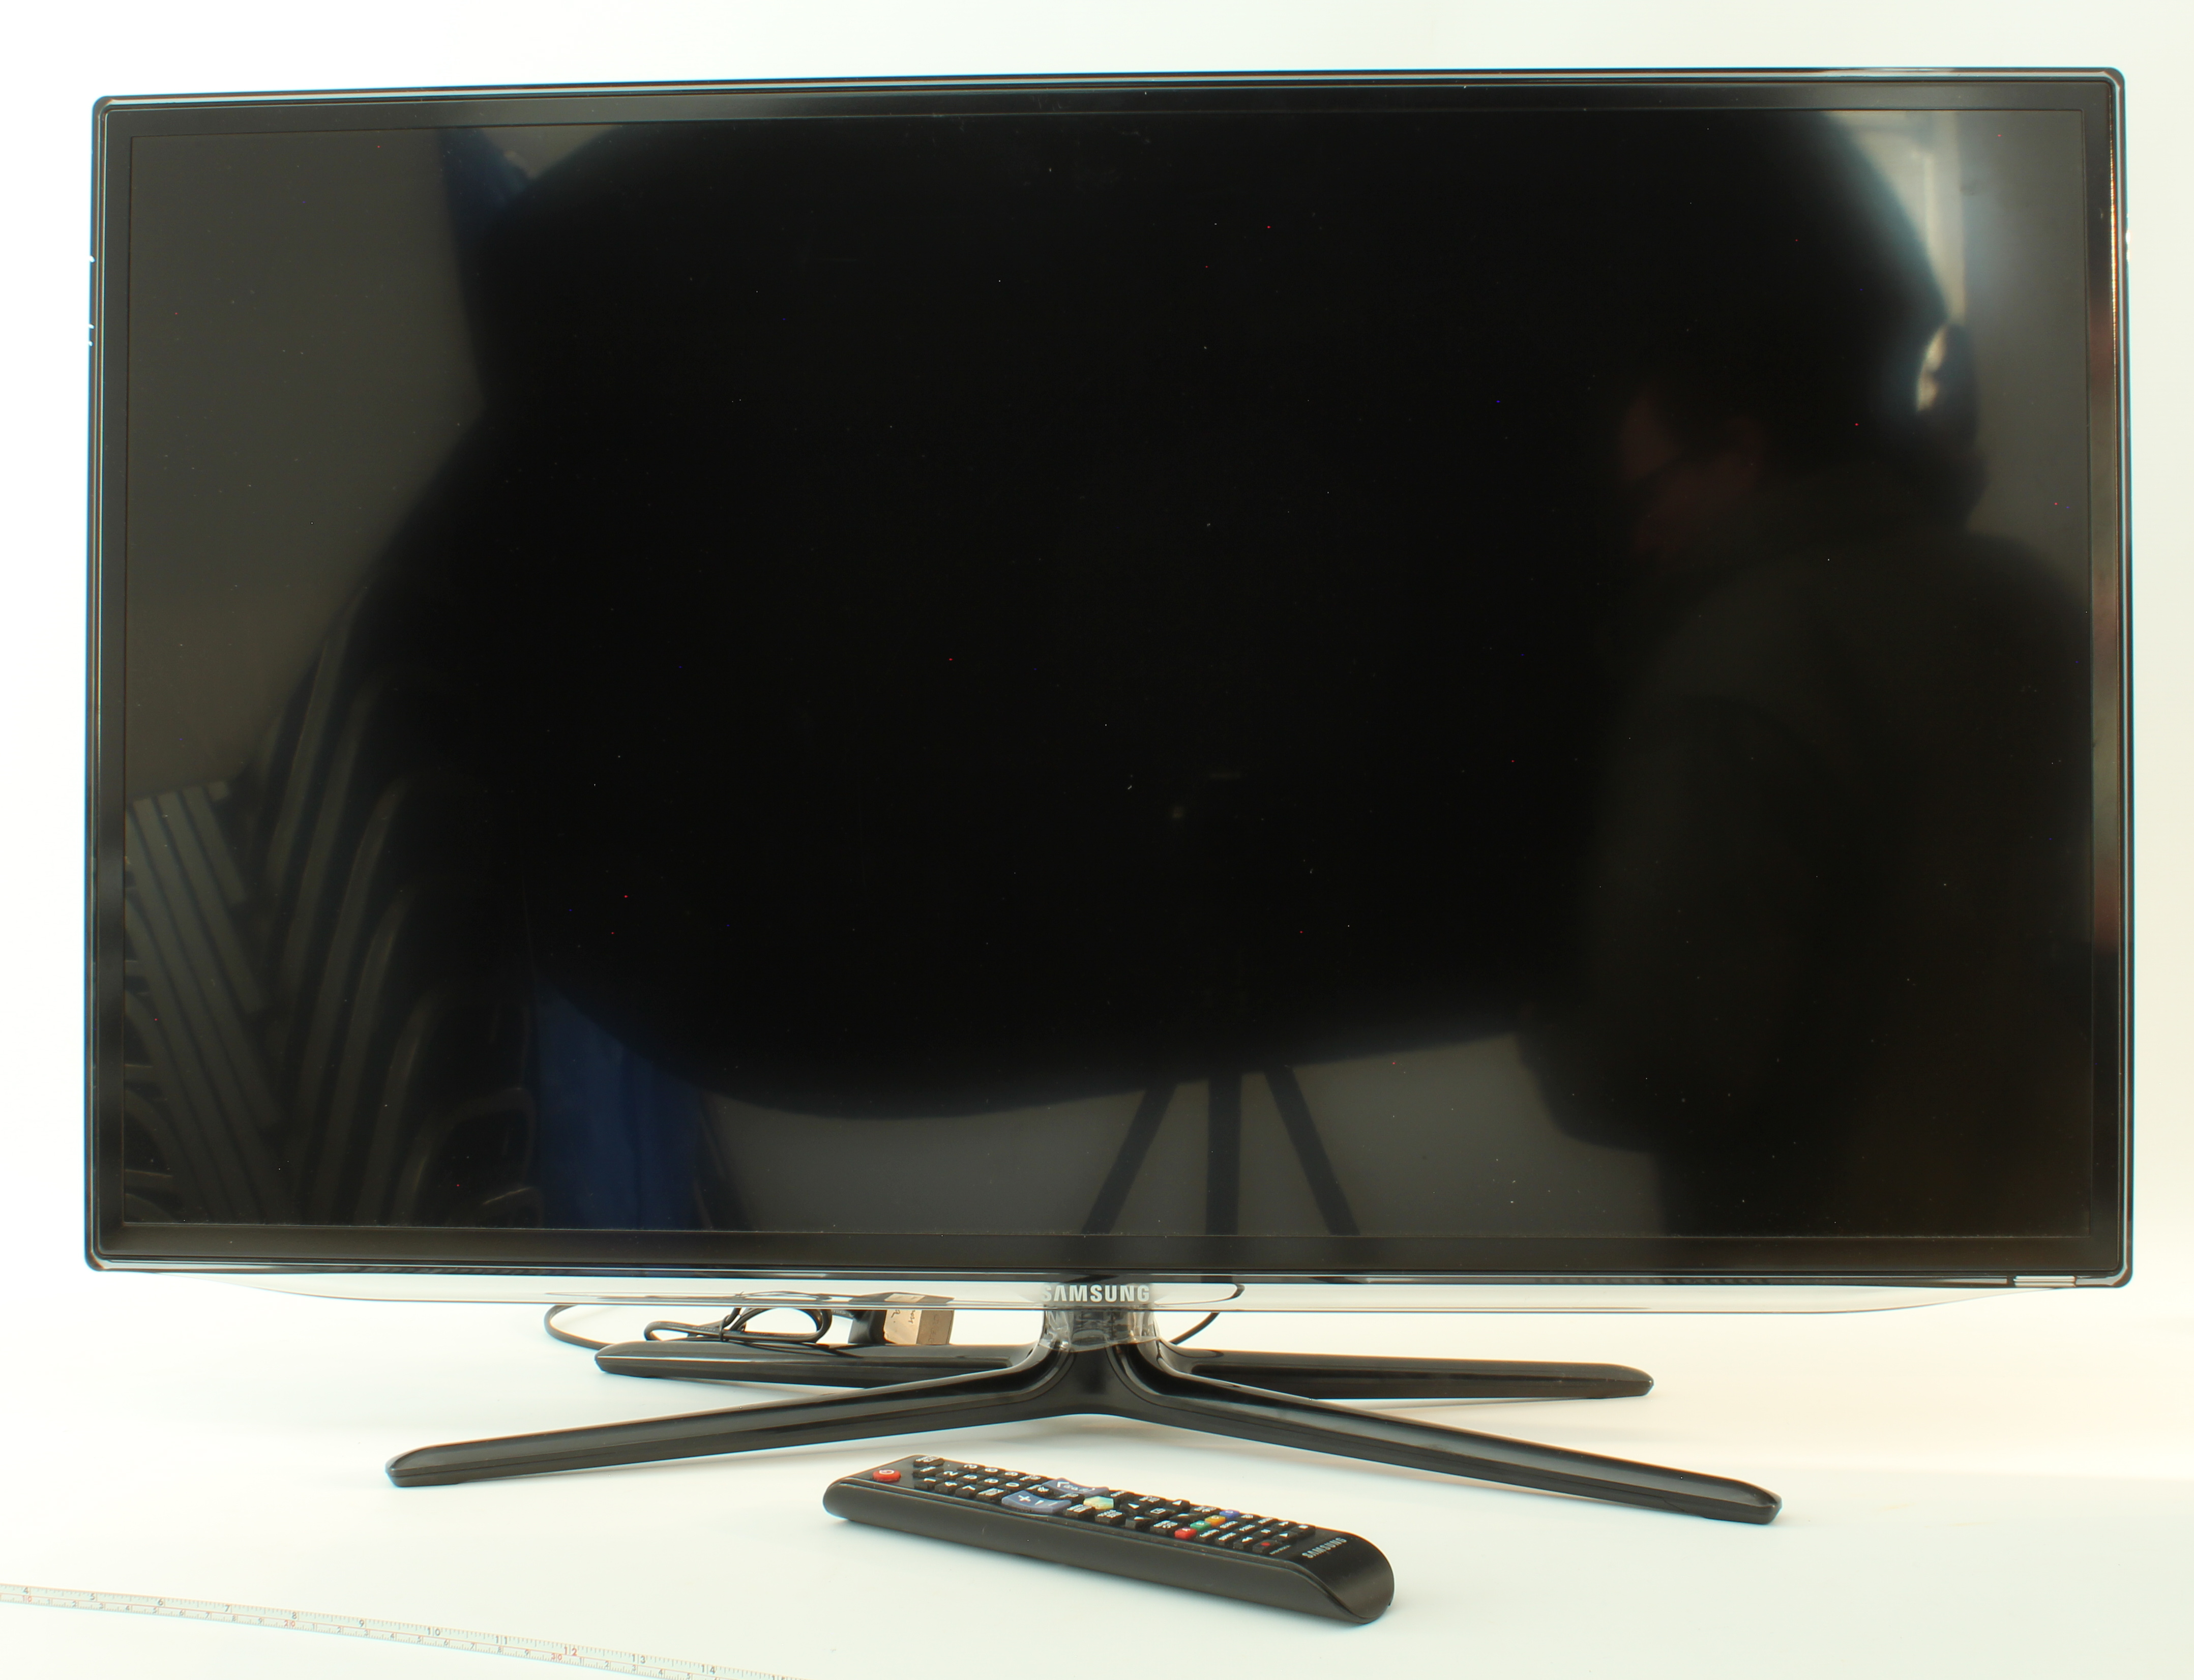 A 37" Samsung tv with remote control and power cable